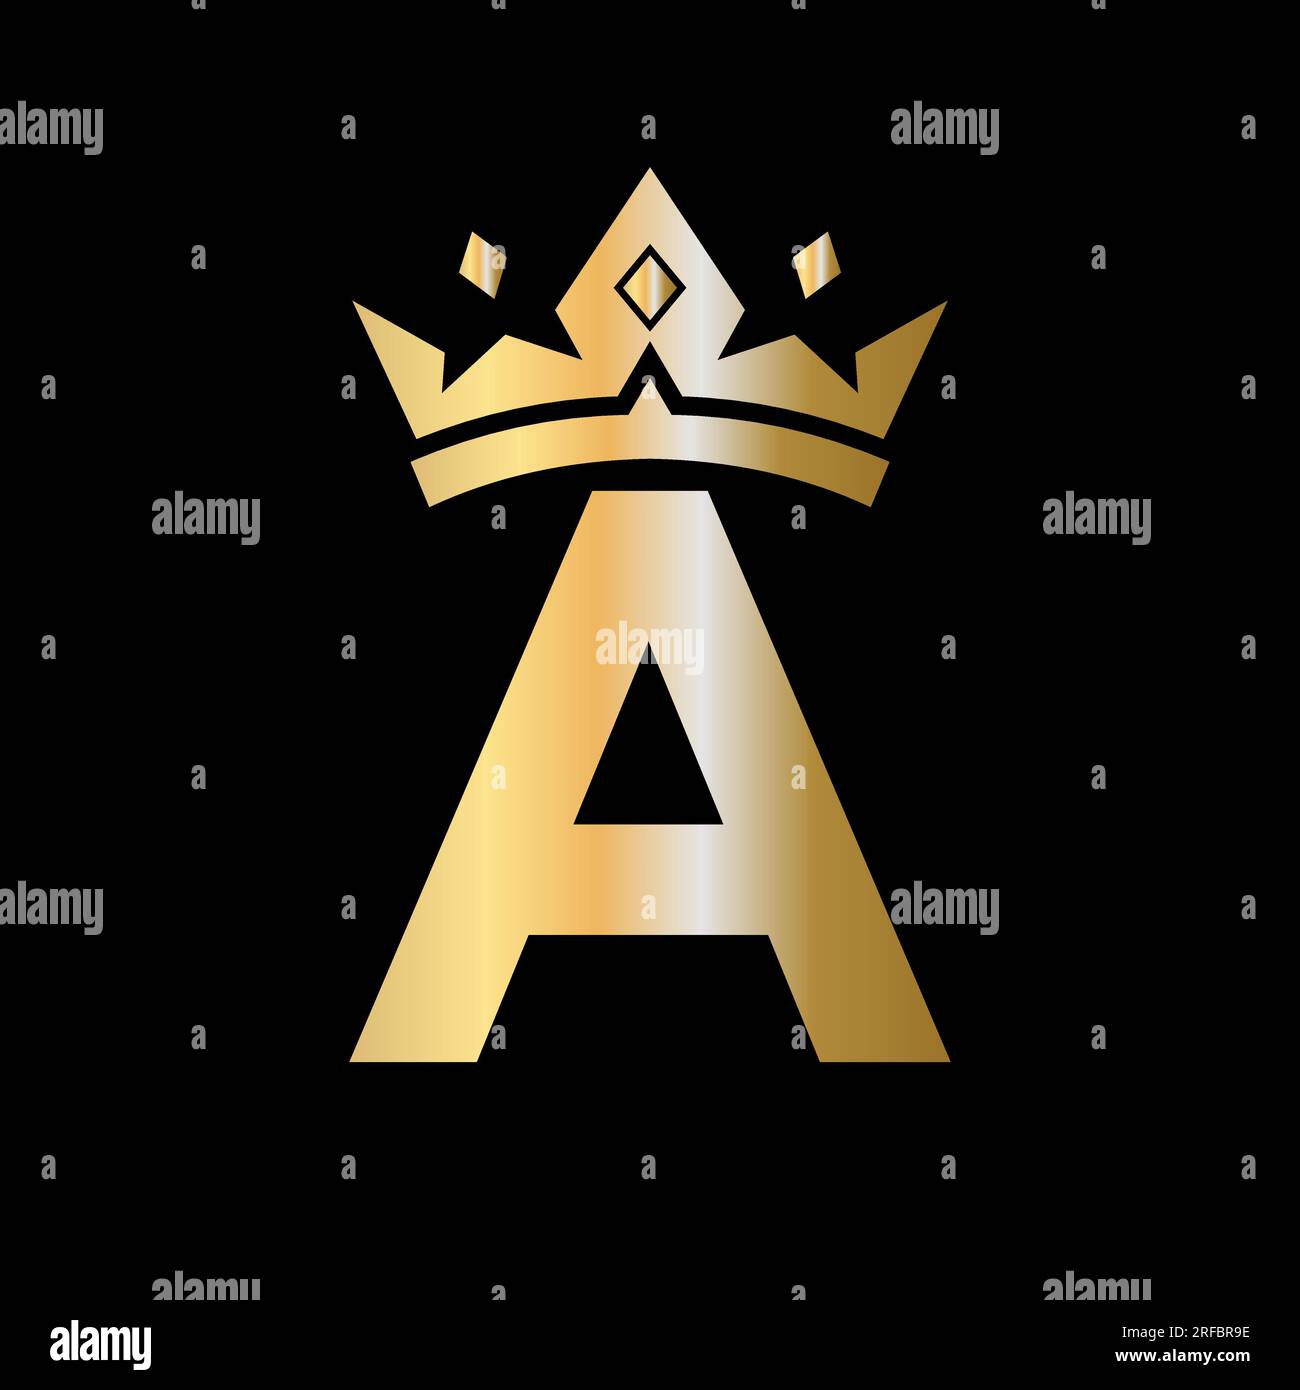 Letter A Crown Logo. Crown Logo on Letter A Vector Template for Beauty, Fashion, Star, Elegant, Luxury Sign Stock Vector